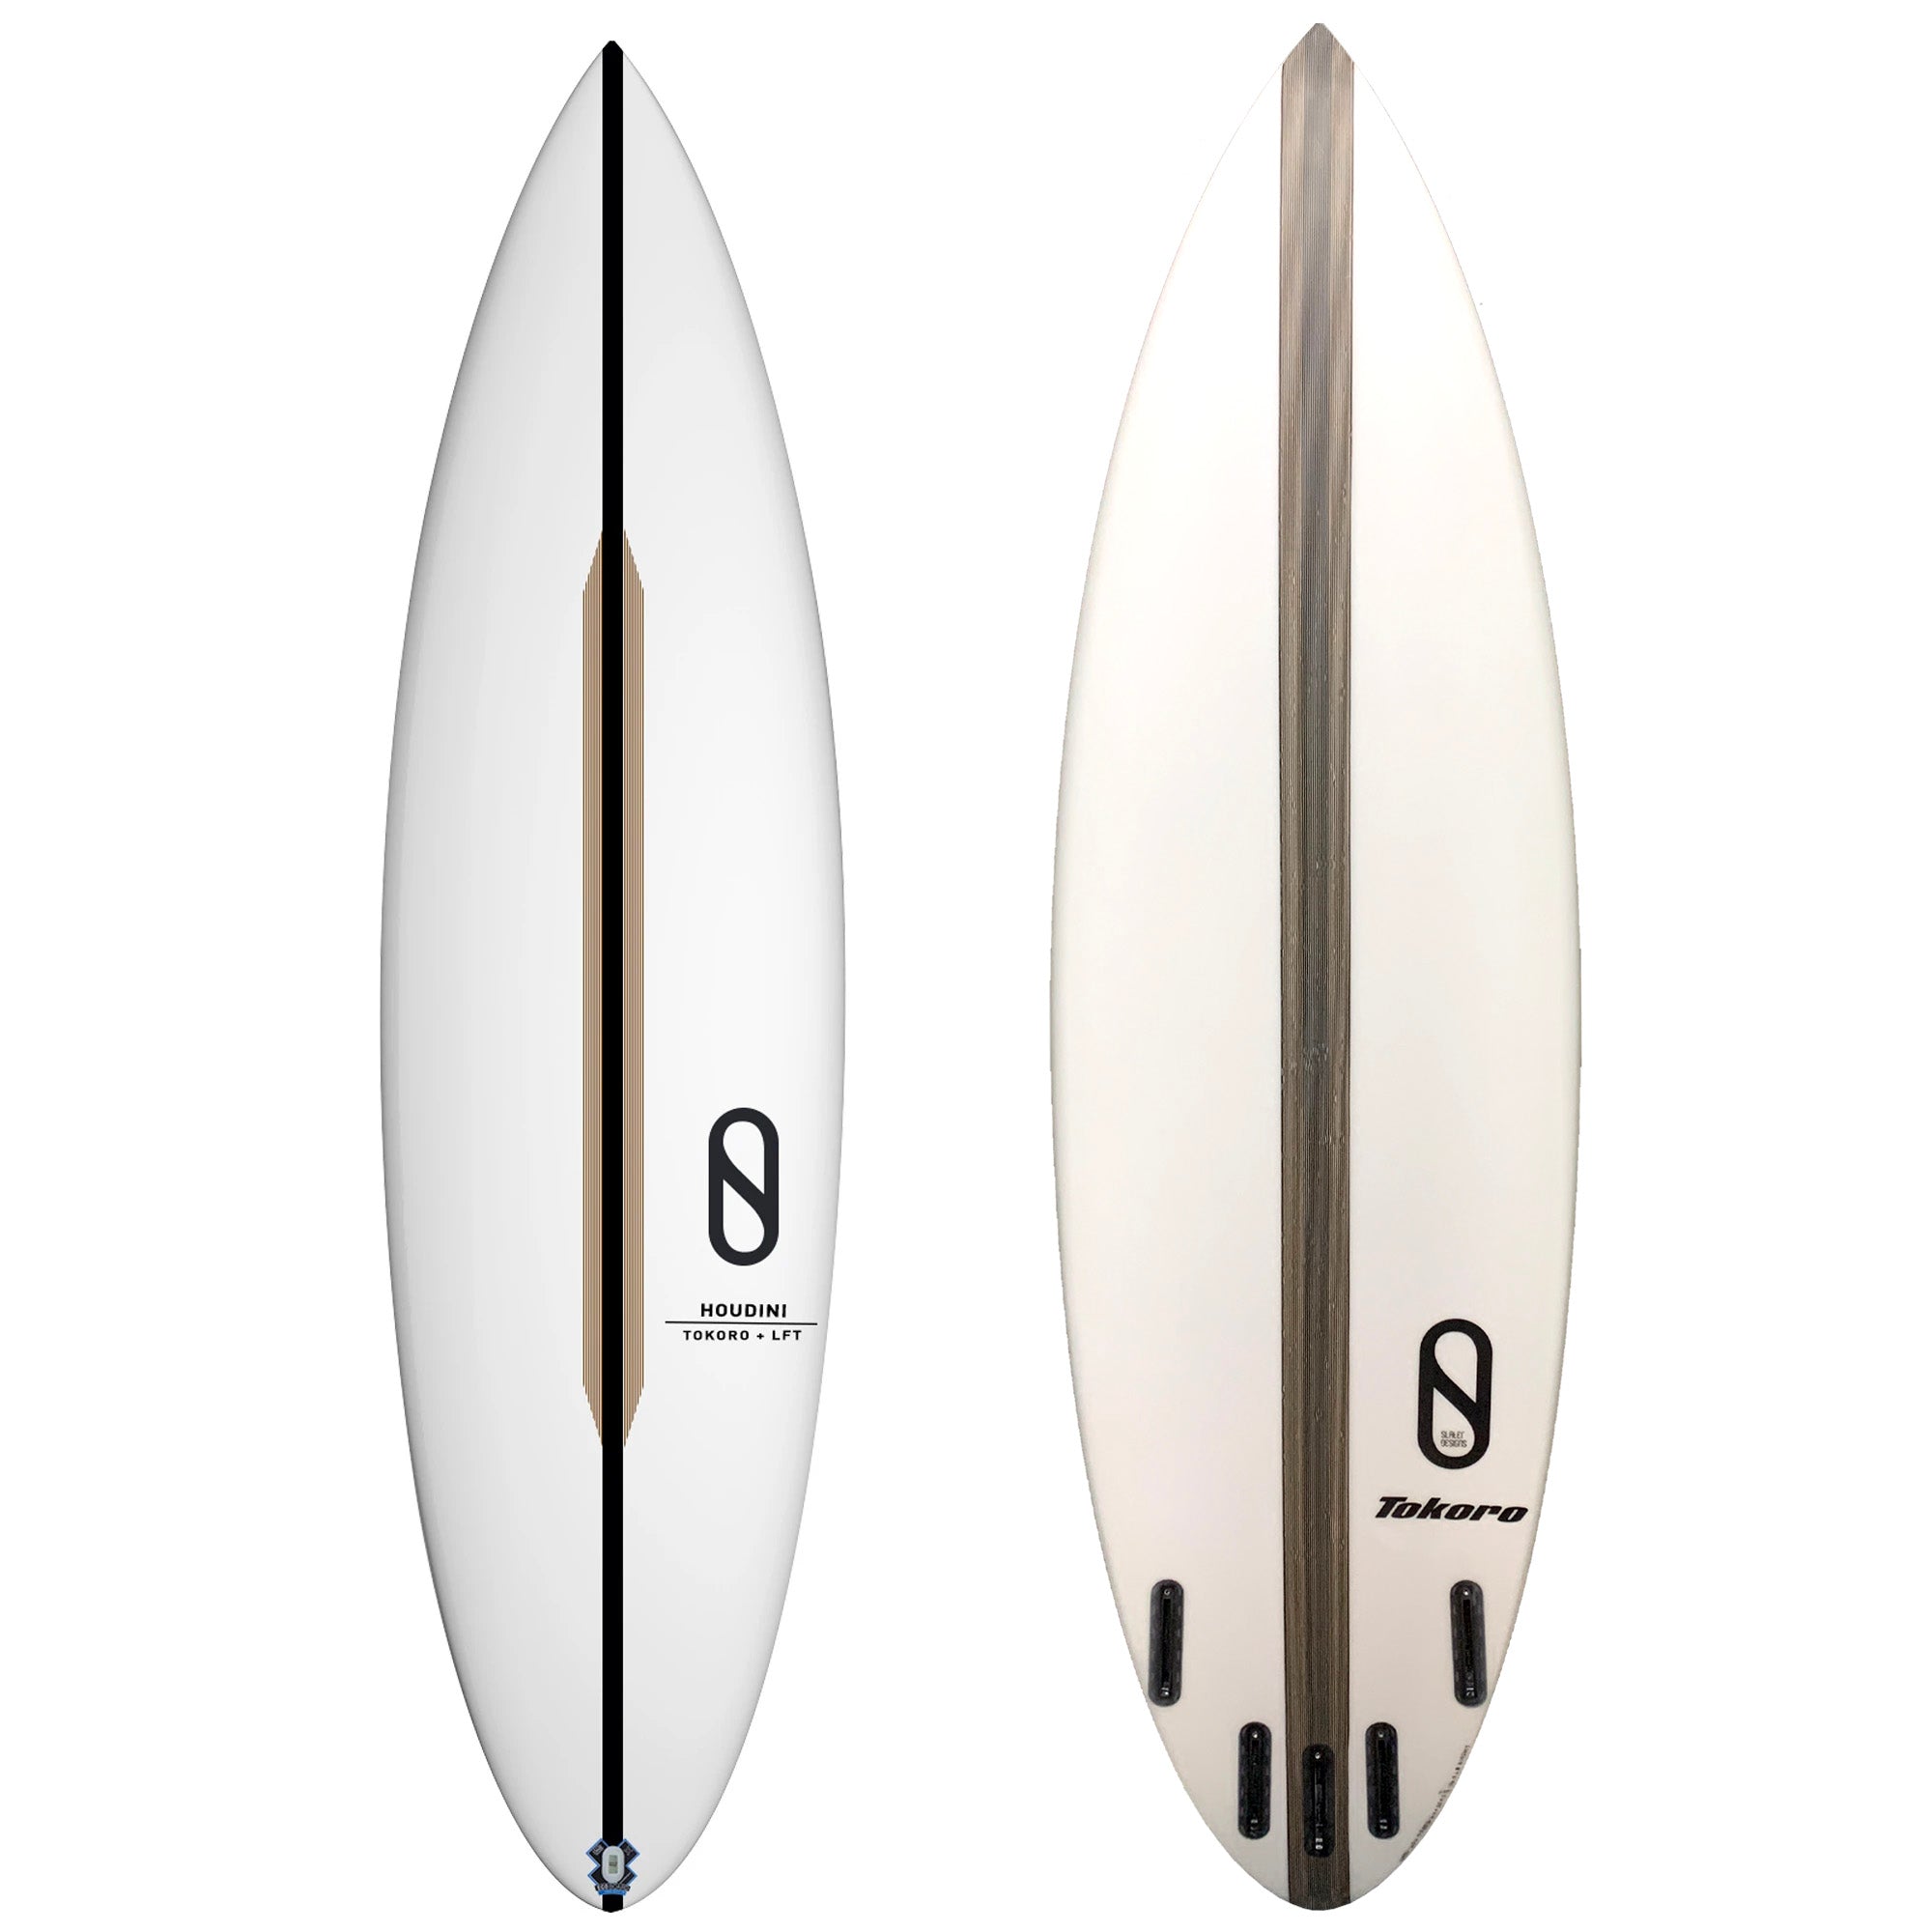 Firewire Houdini LFT Surfboard   Futures   Surf Station Store